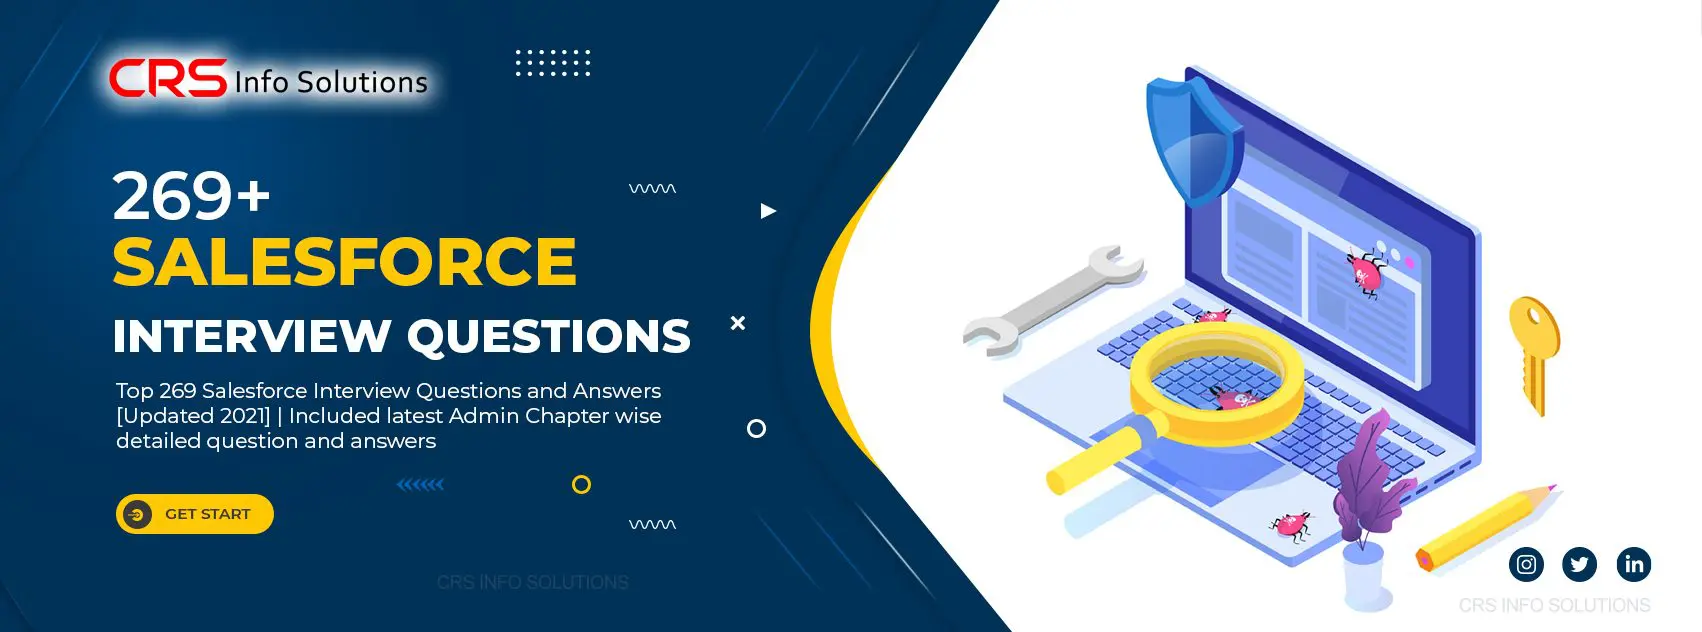 Top 269 Salesforce Interview Questions and Answers [Updated 2021] | Included latest Admin Chapter wise detailed question and answers